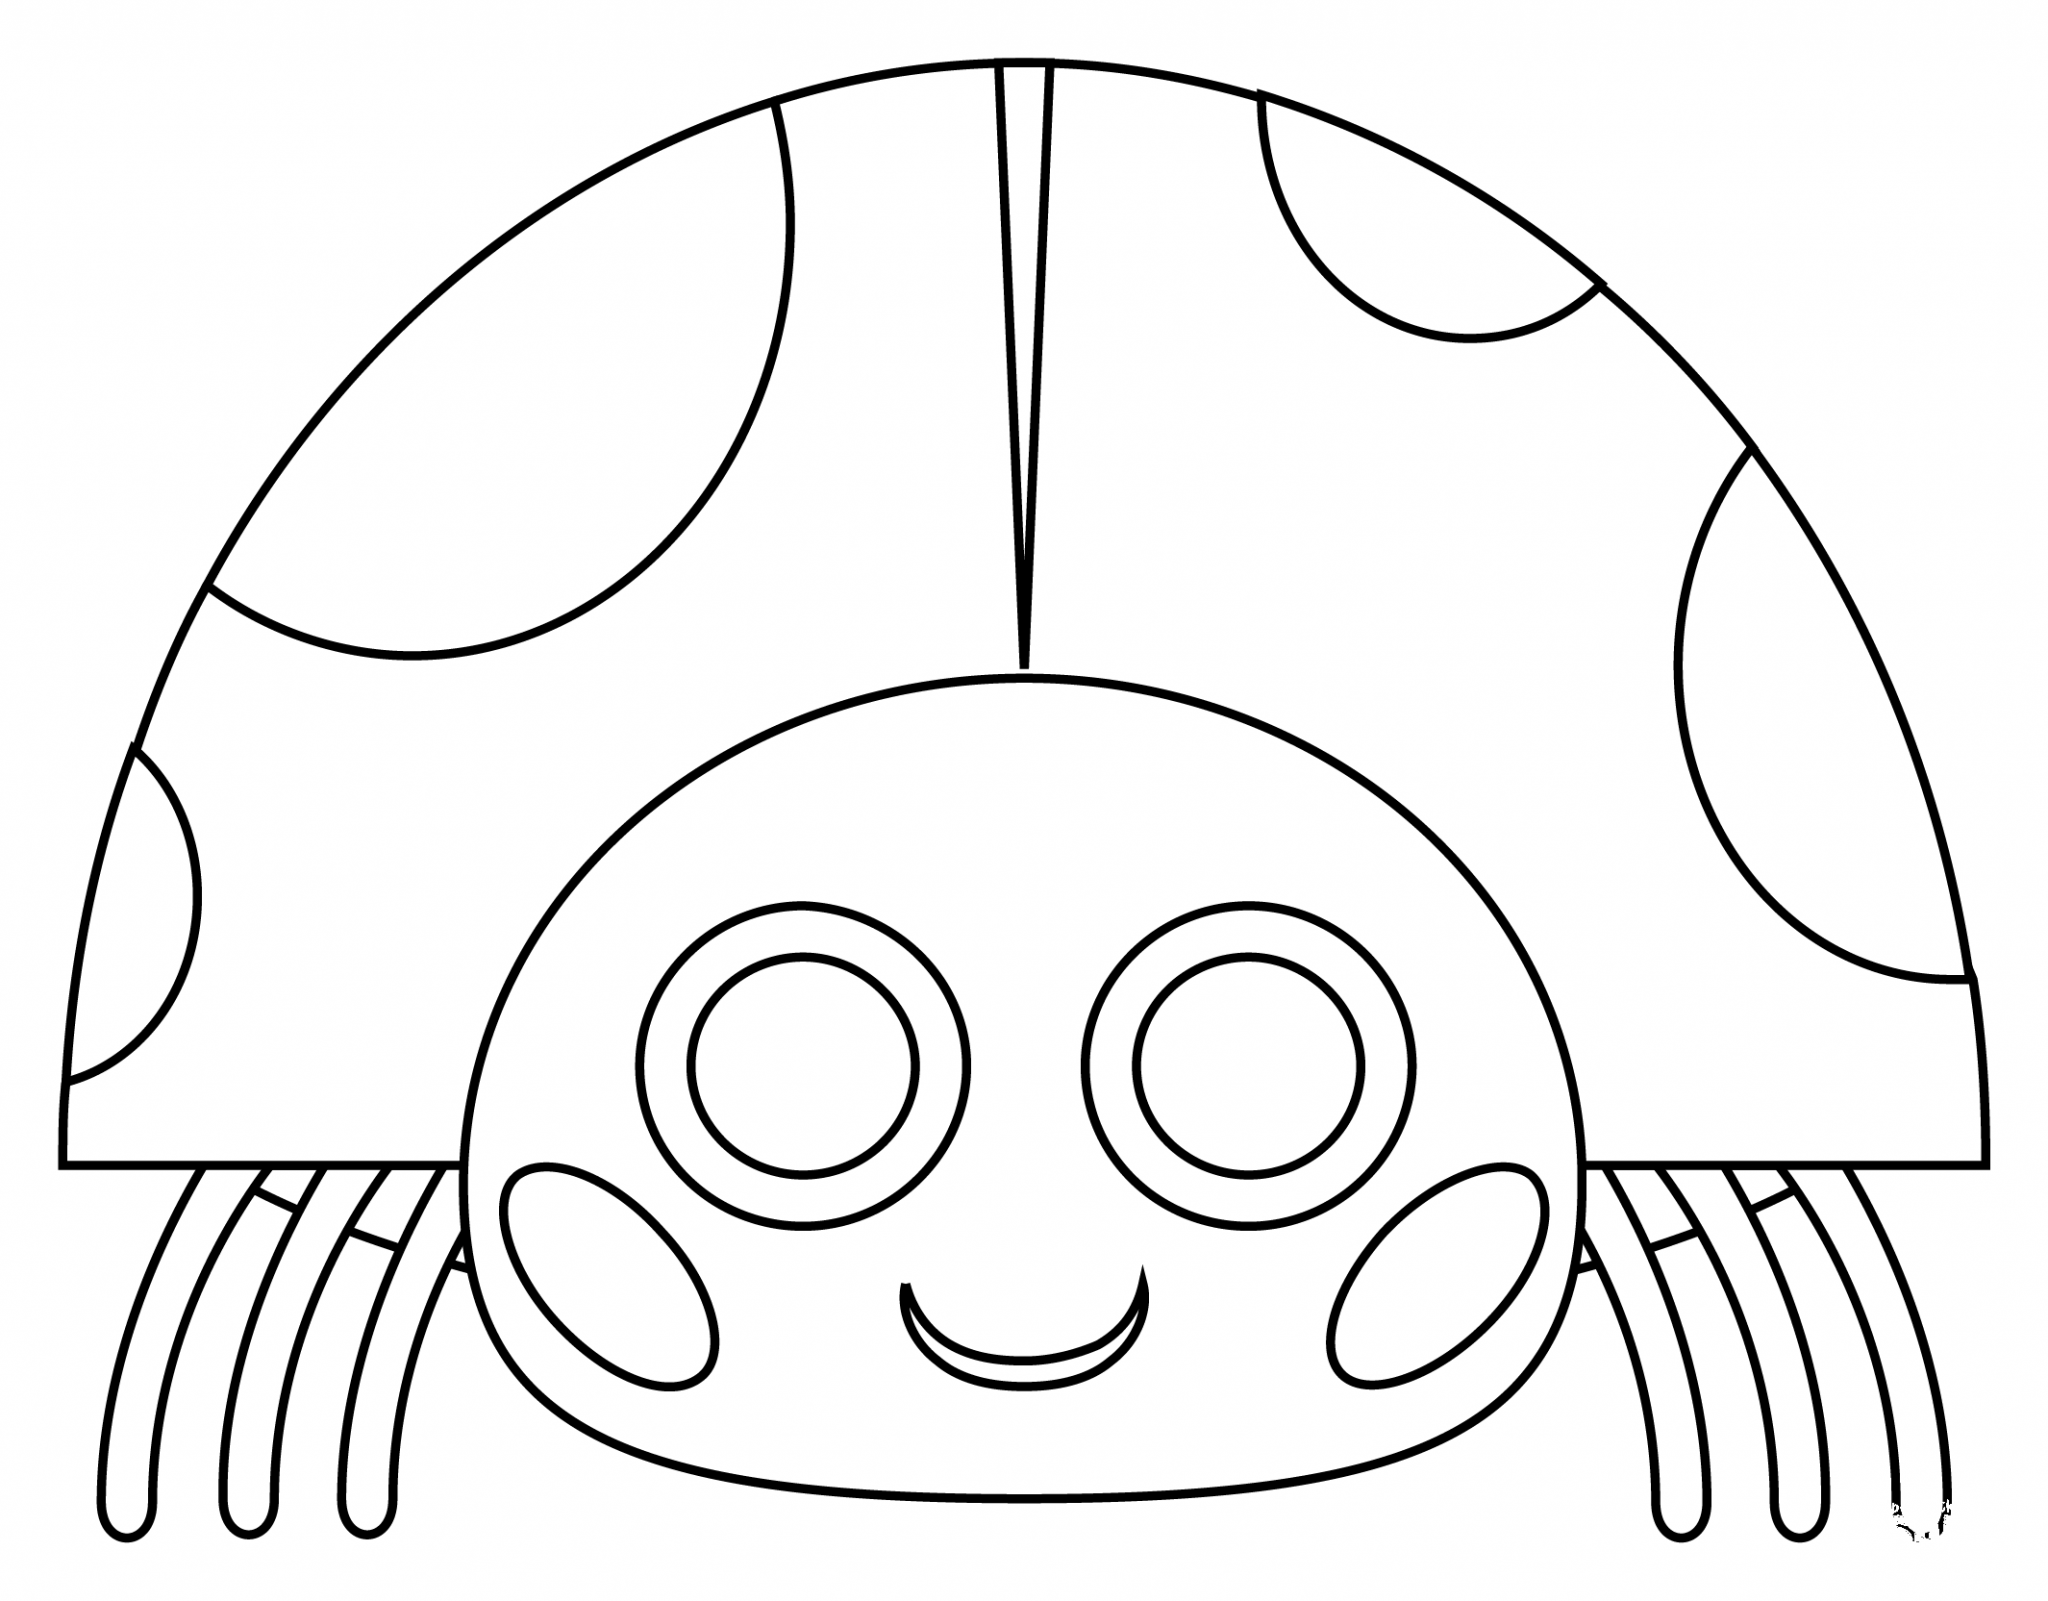 lady-beetle-coloring-page-colouringpages